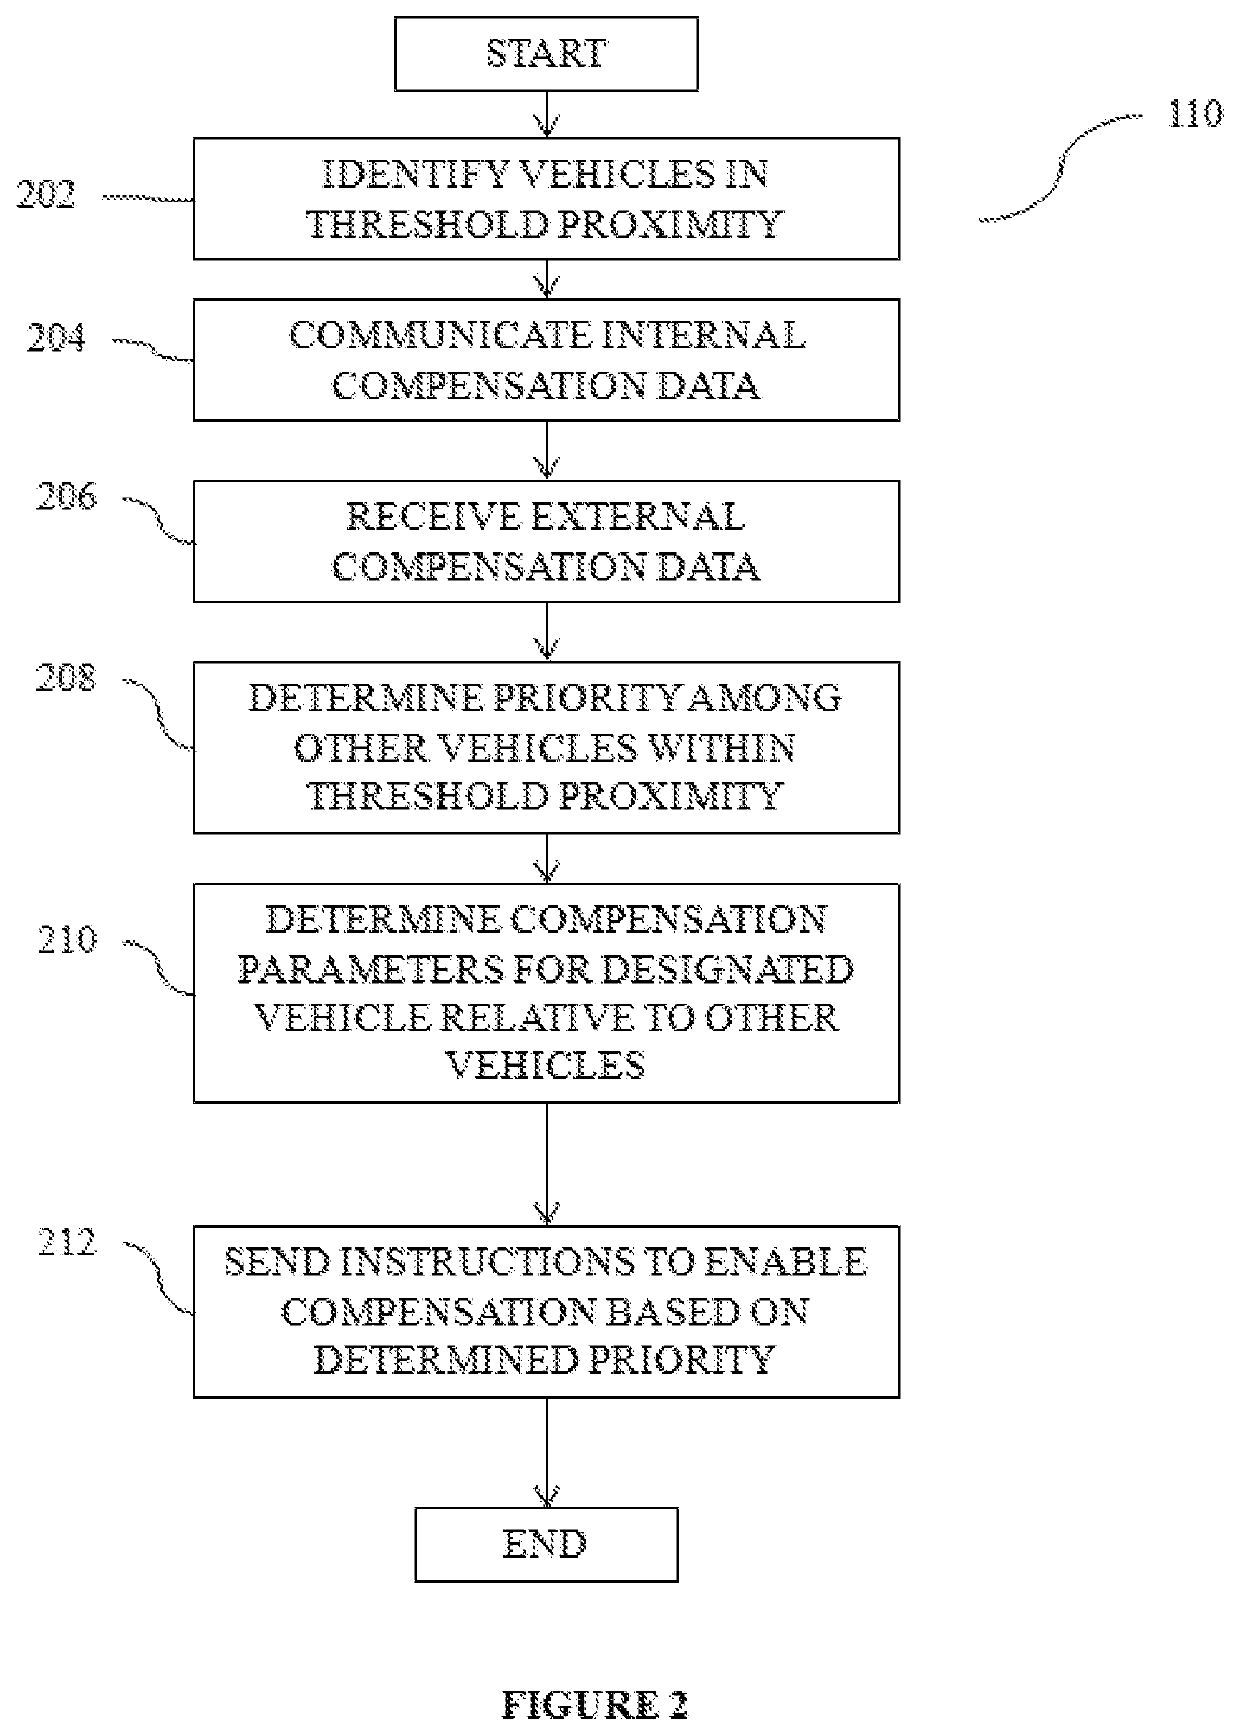 Vehicle priority-based compensation system